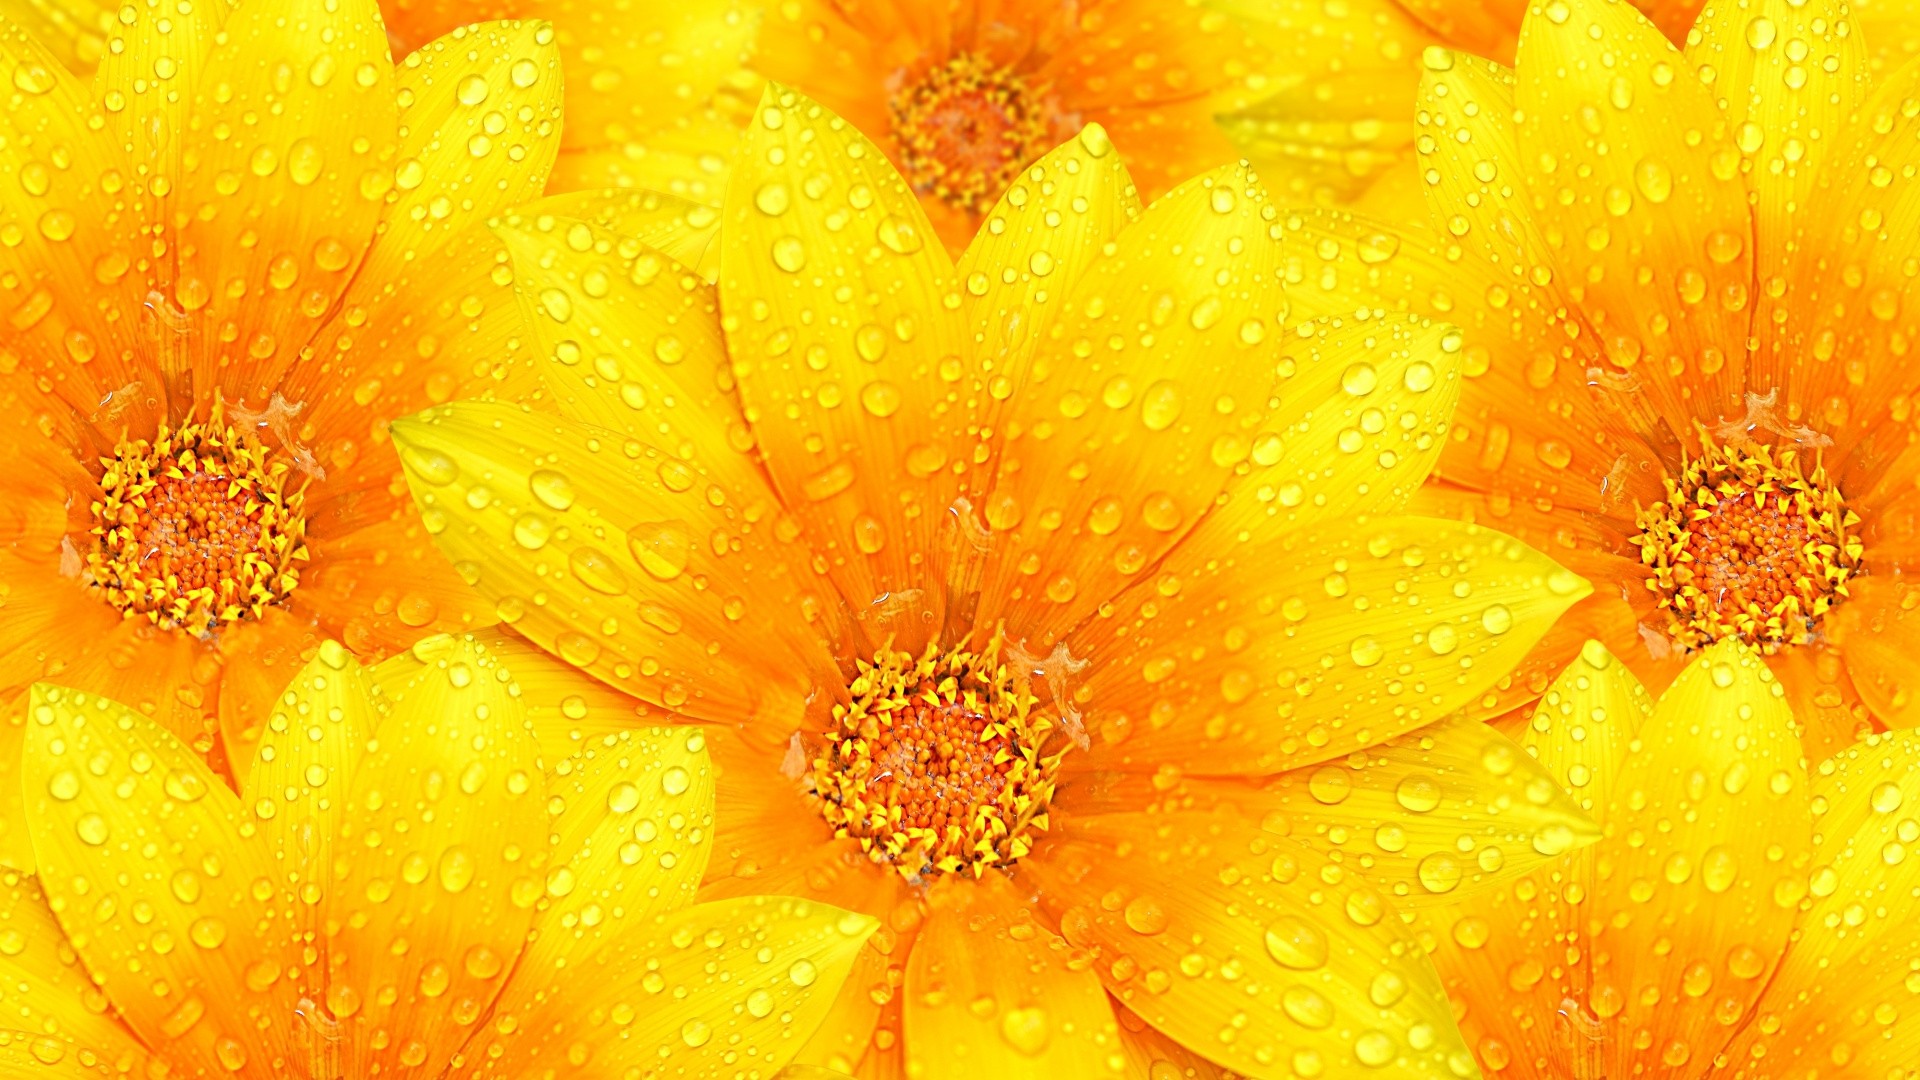 Yellow Flower Hd Wallpapers